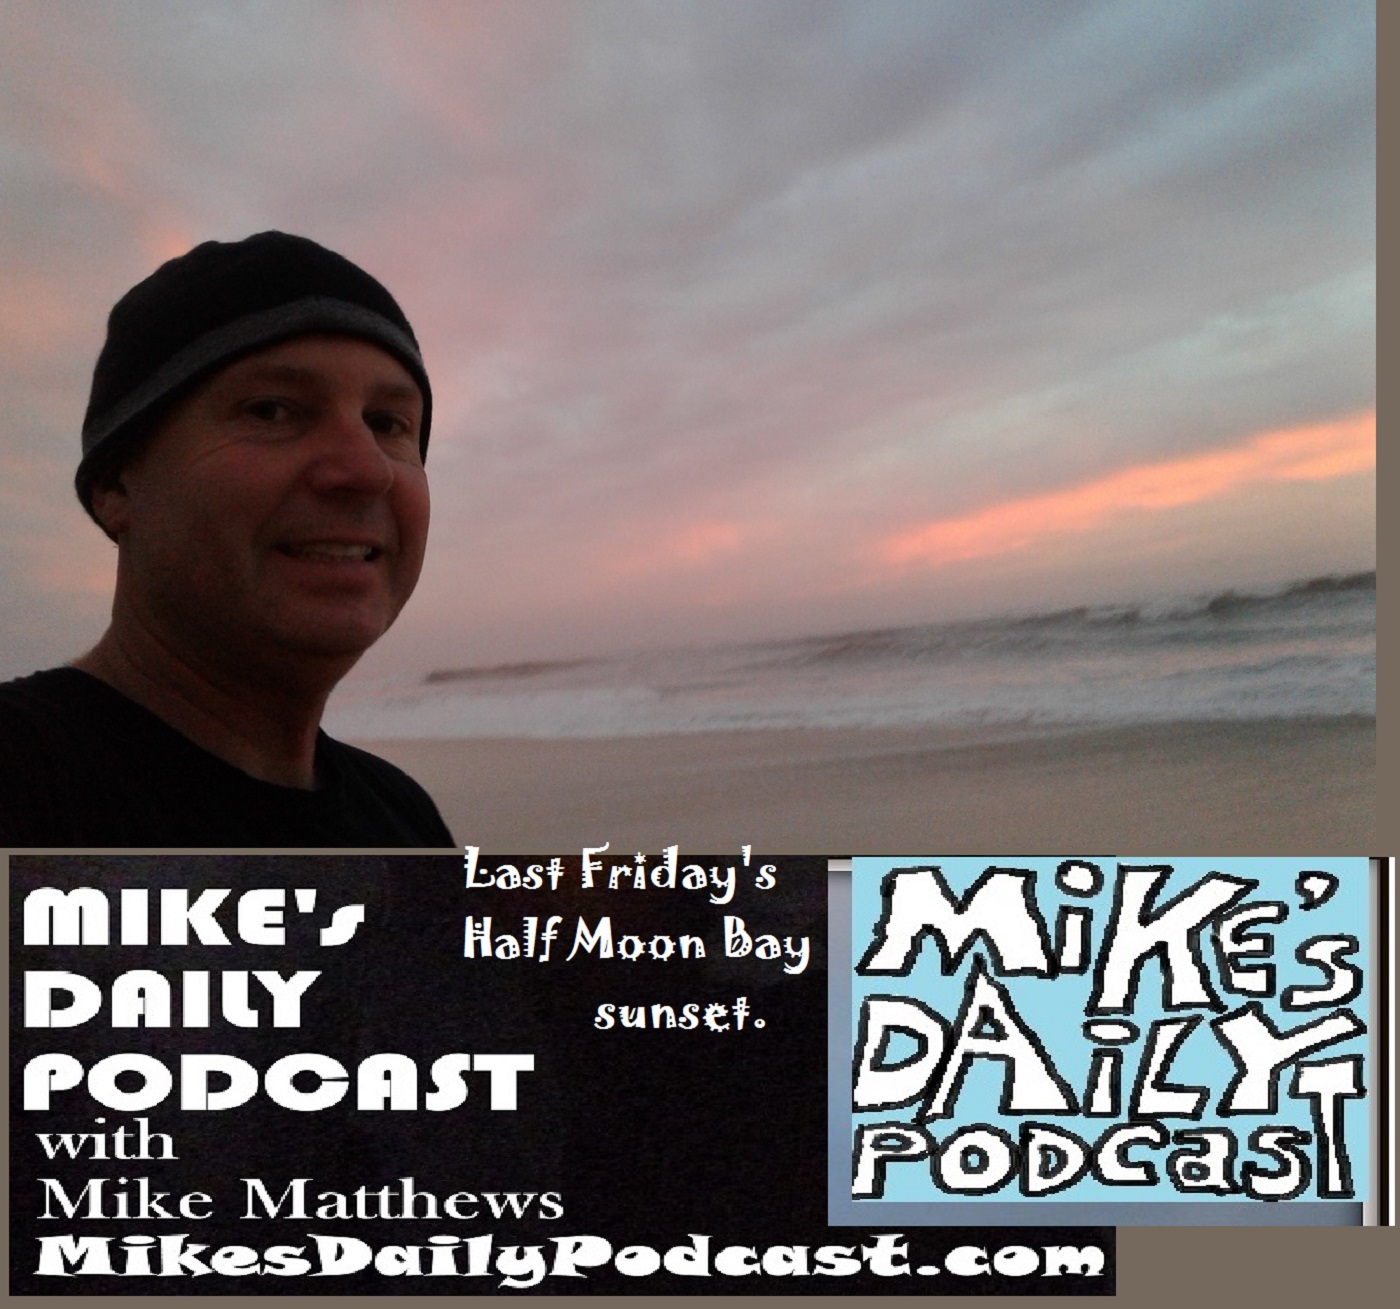 mikes-daily-podcast-1223-half-moon-bay-sunset